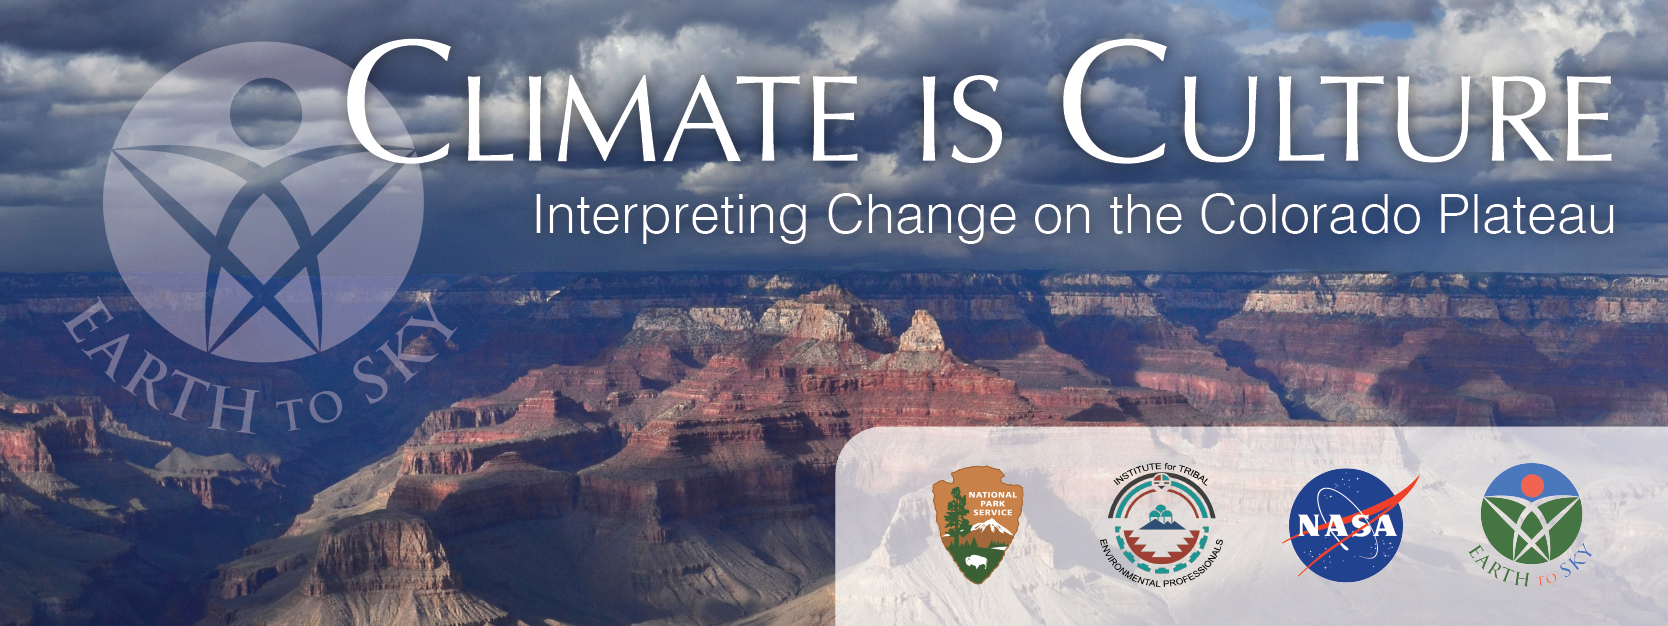  Climate is Culture, Interpreting Change on the Colorado Plateau.